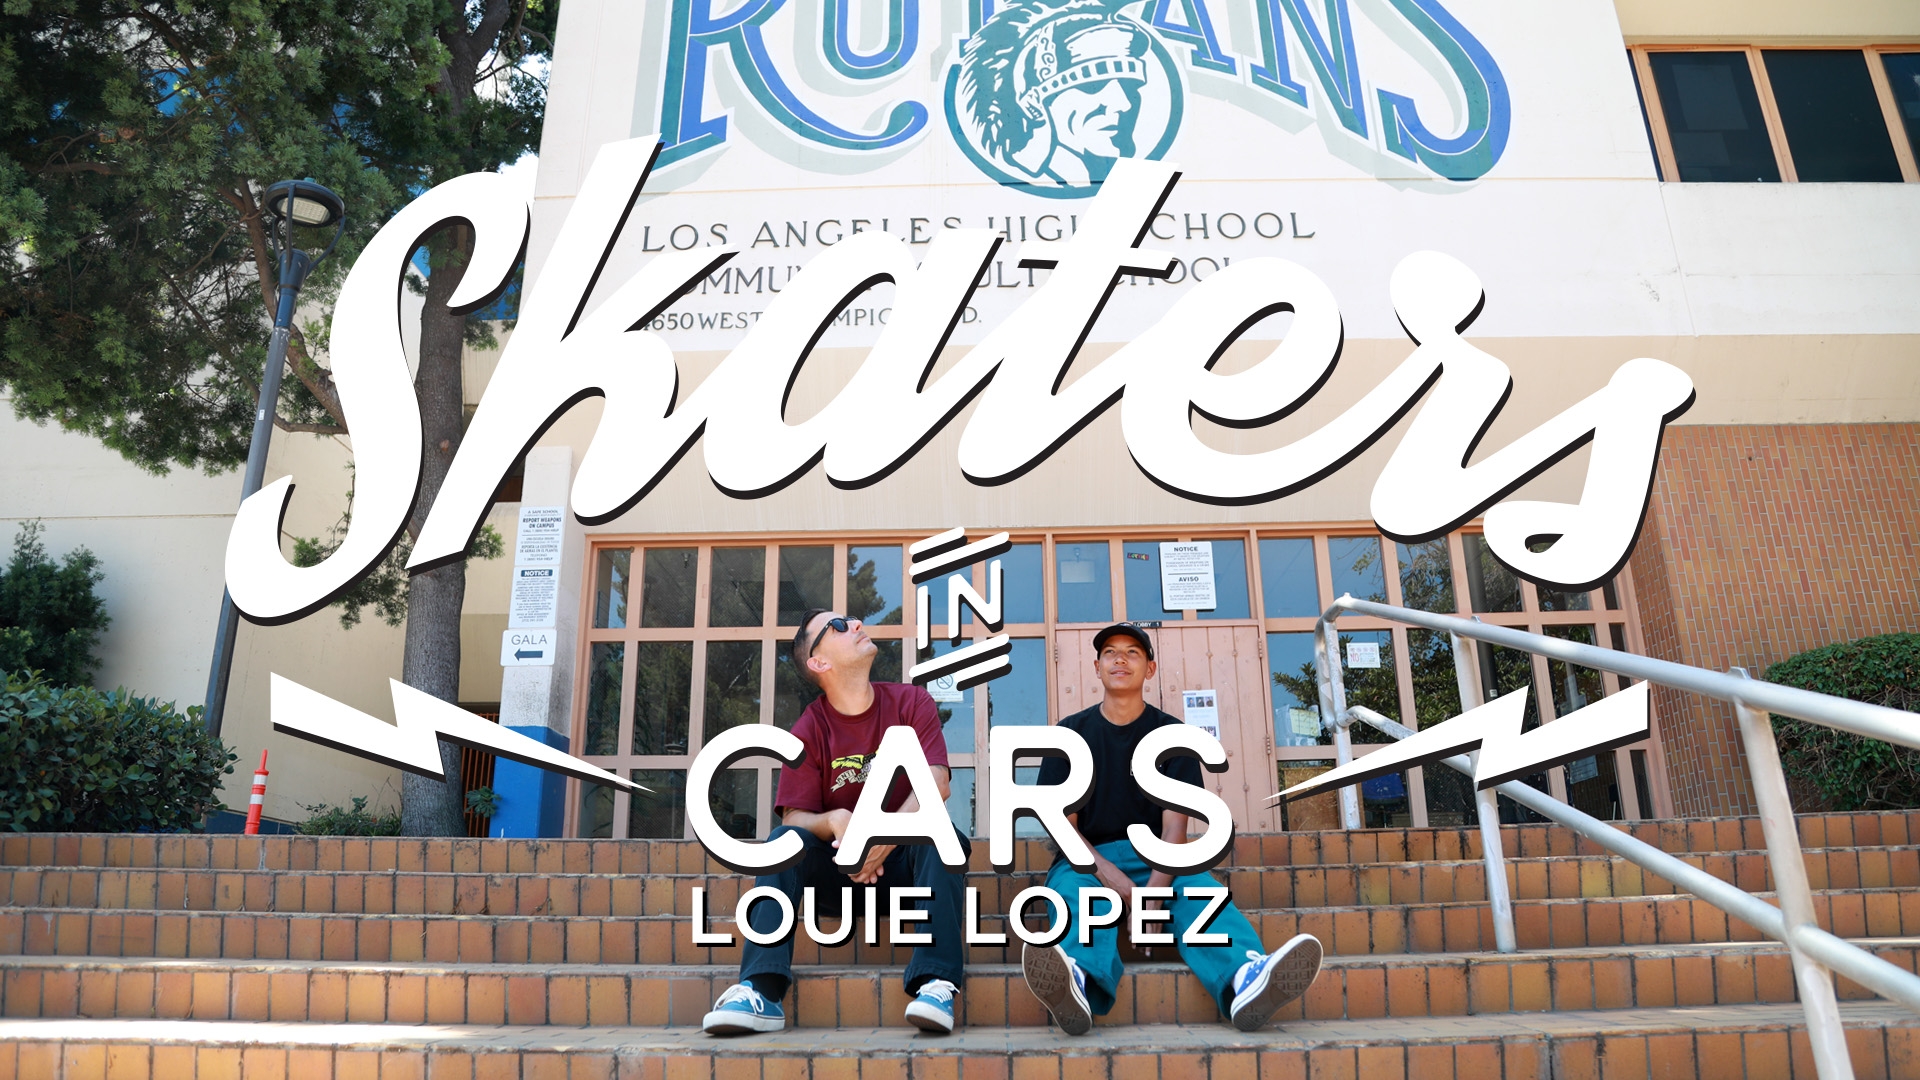 Skaters In Cars Looking At Spots: Louie Lopez